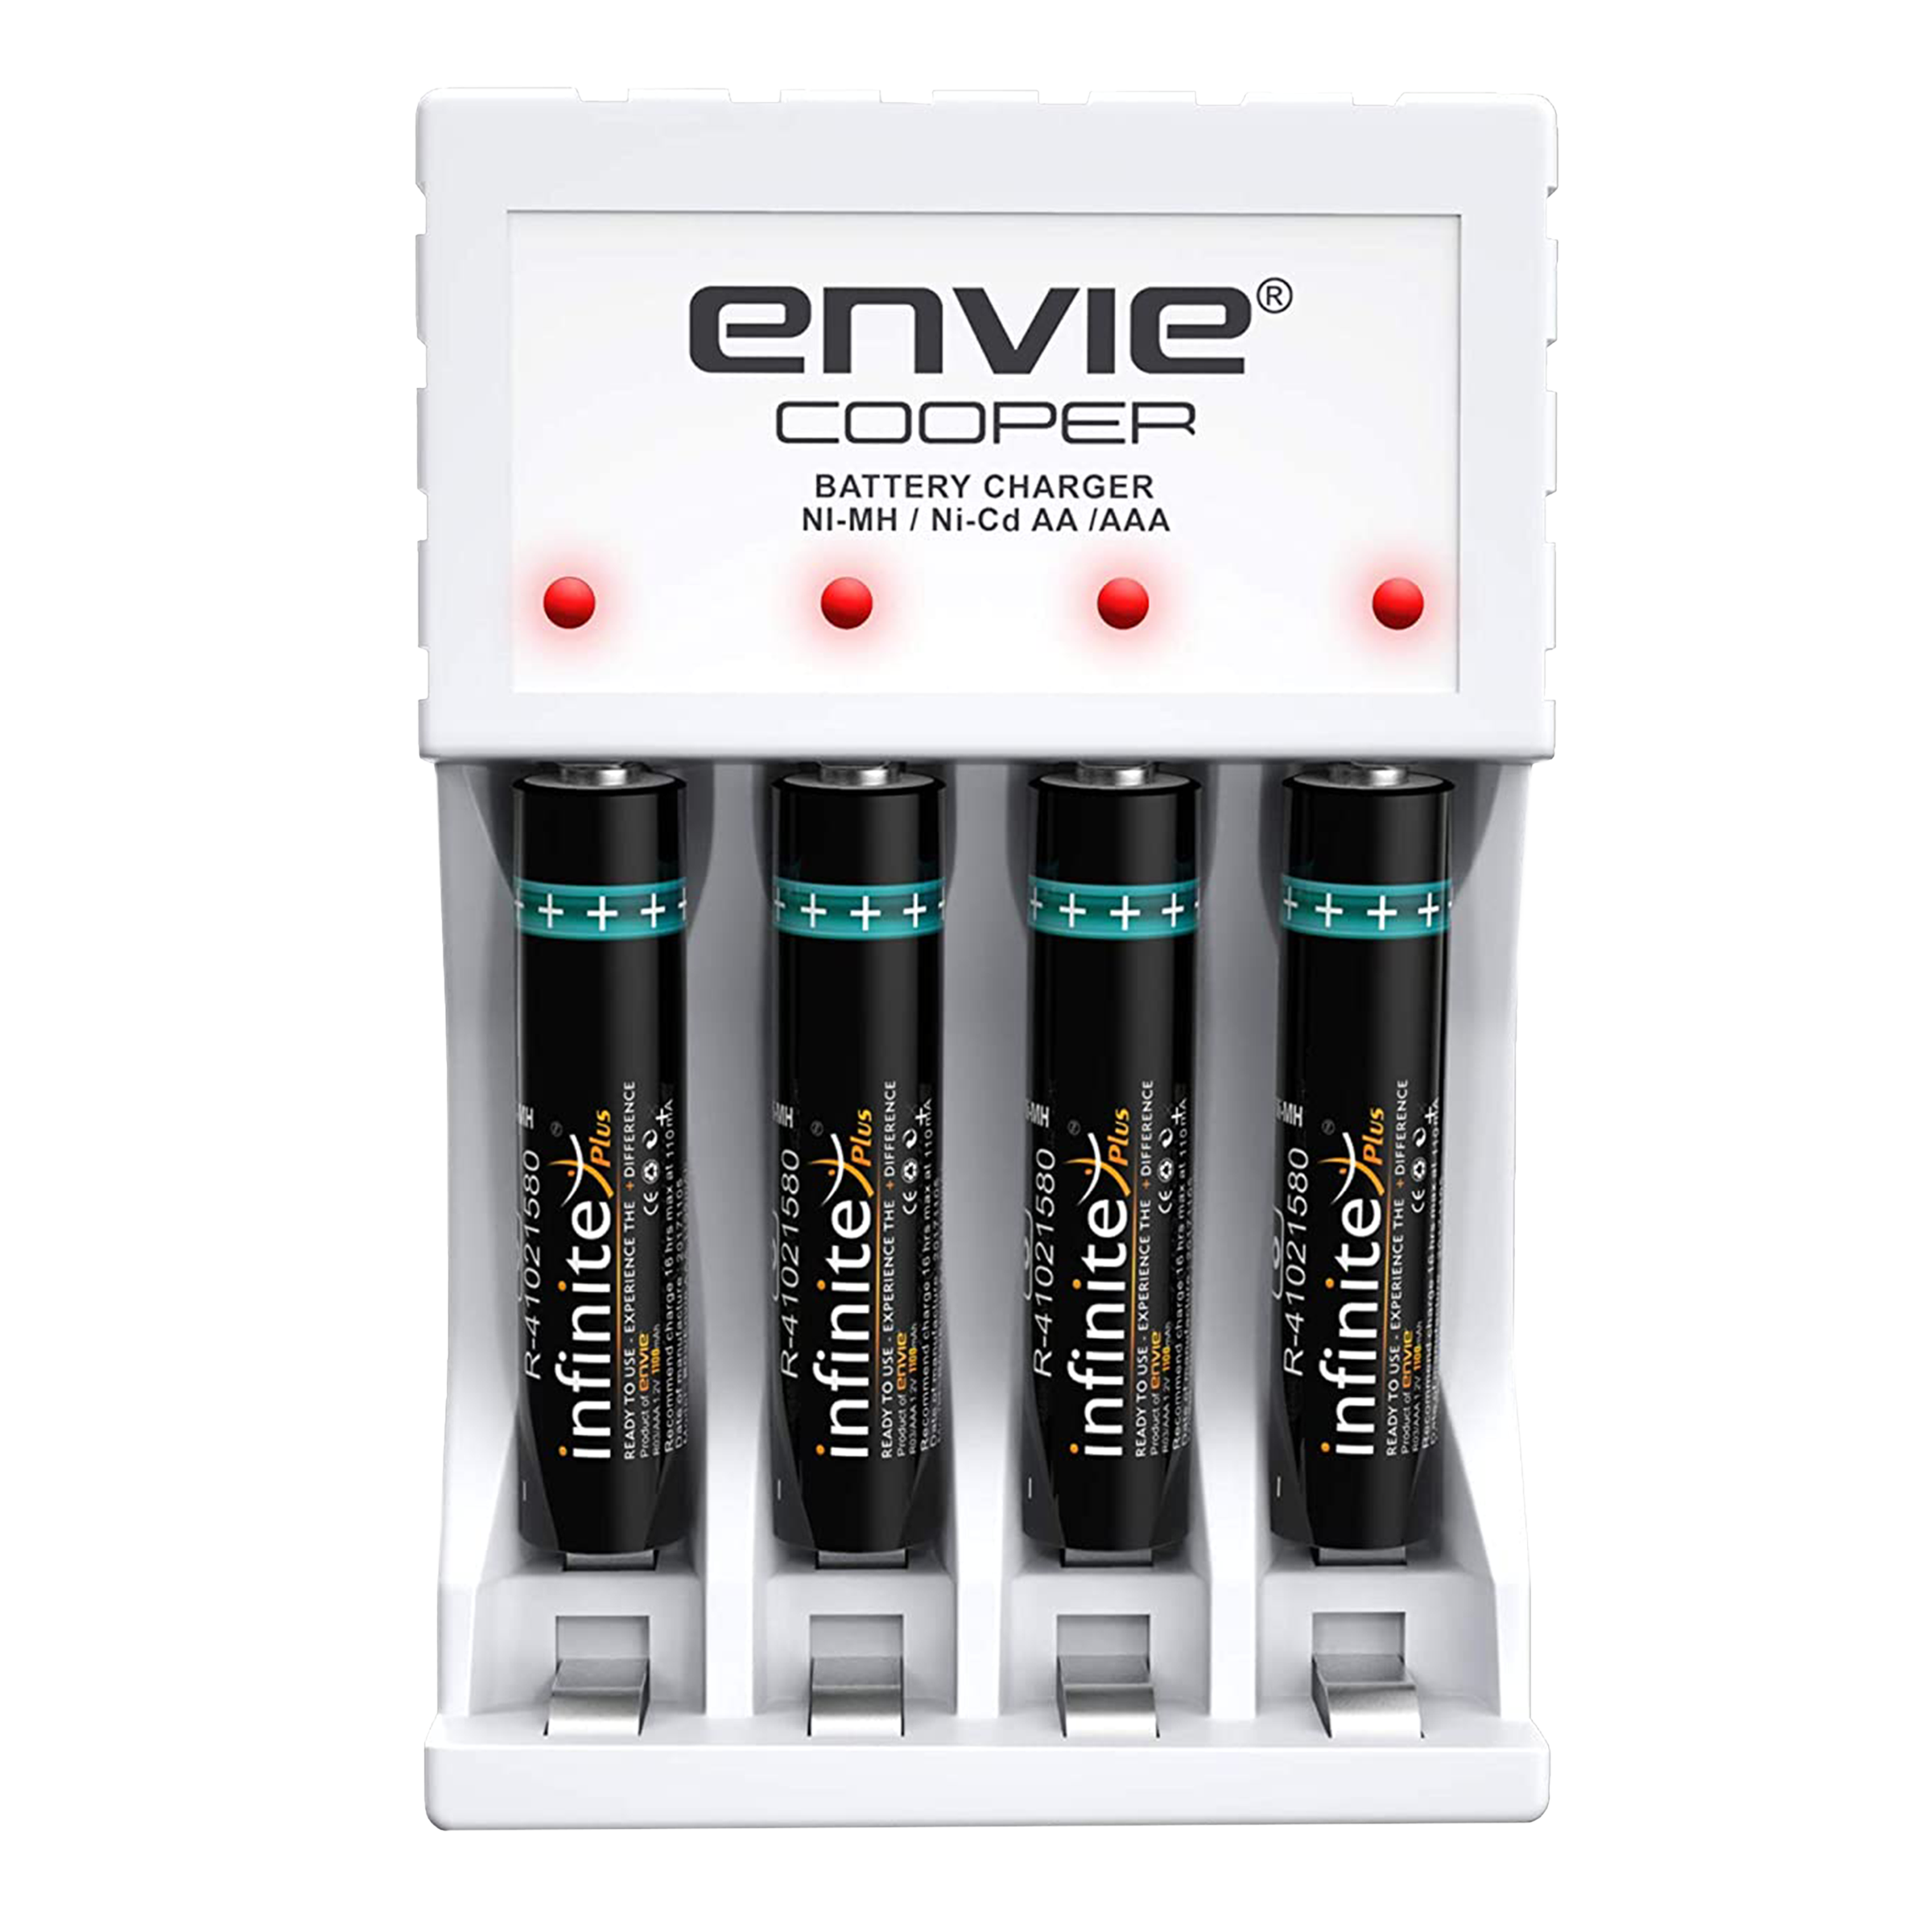 envie Cooper ECR-20 MC Camera Battery Charger Combo for AAA1100 (4-Ports, Short Circuit Protection)